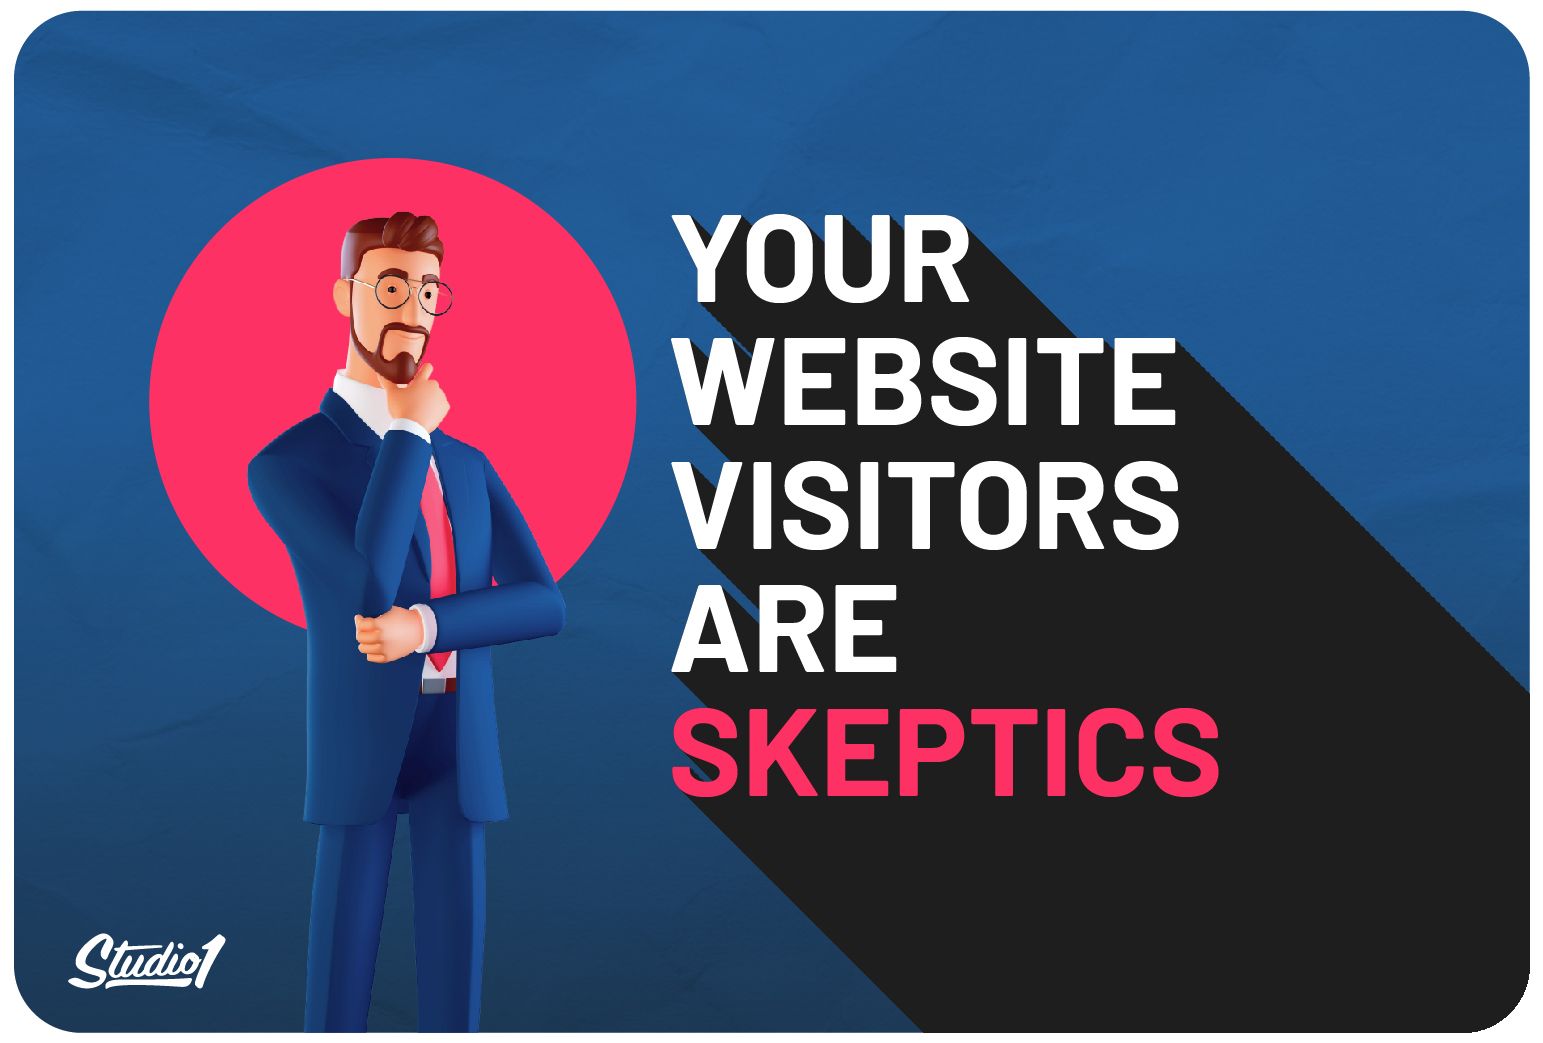 Your Website Visitors Are Skeptics